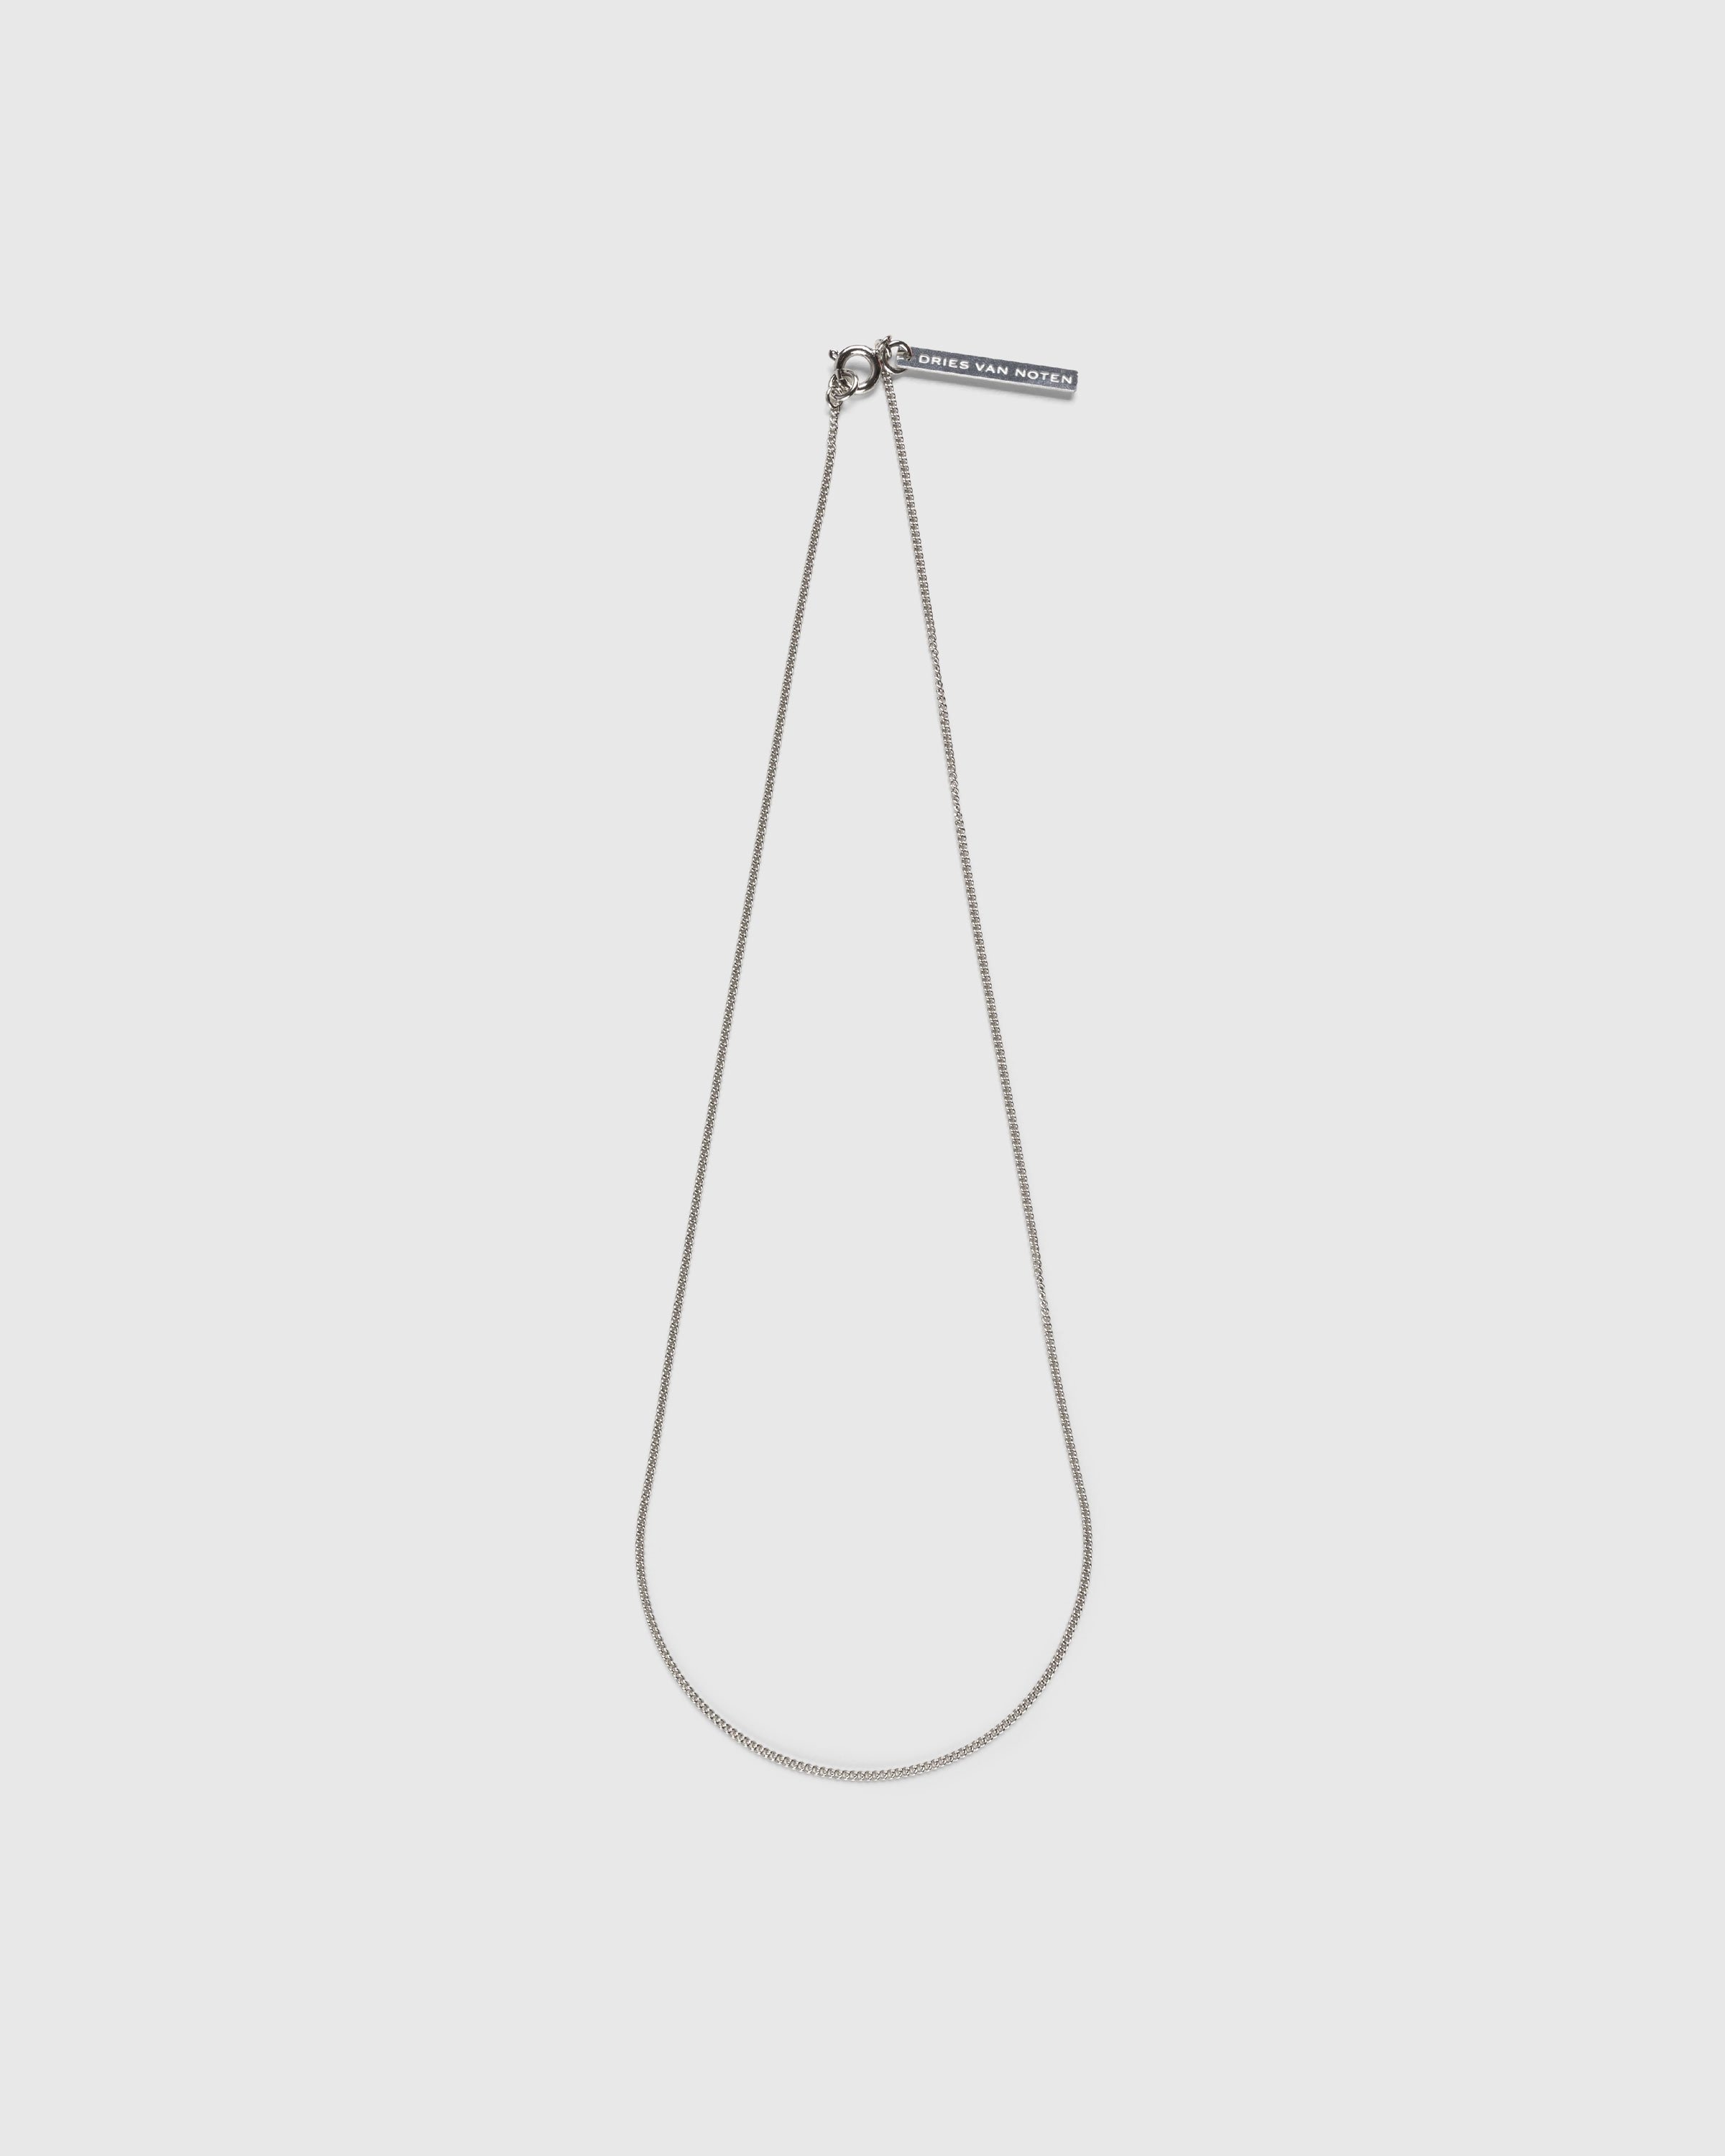 Dries van Noten – Logo Tag Necklace Silver - Jewelry - Silver - Image 1